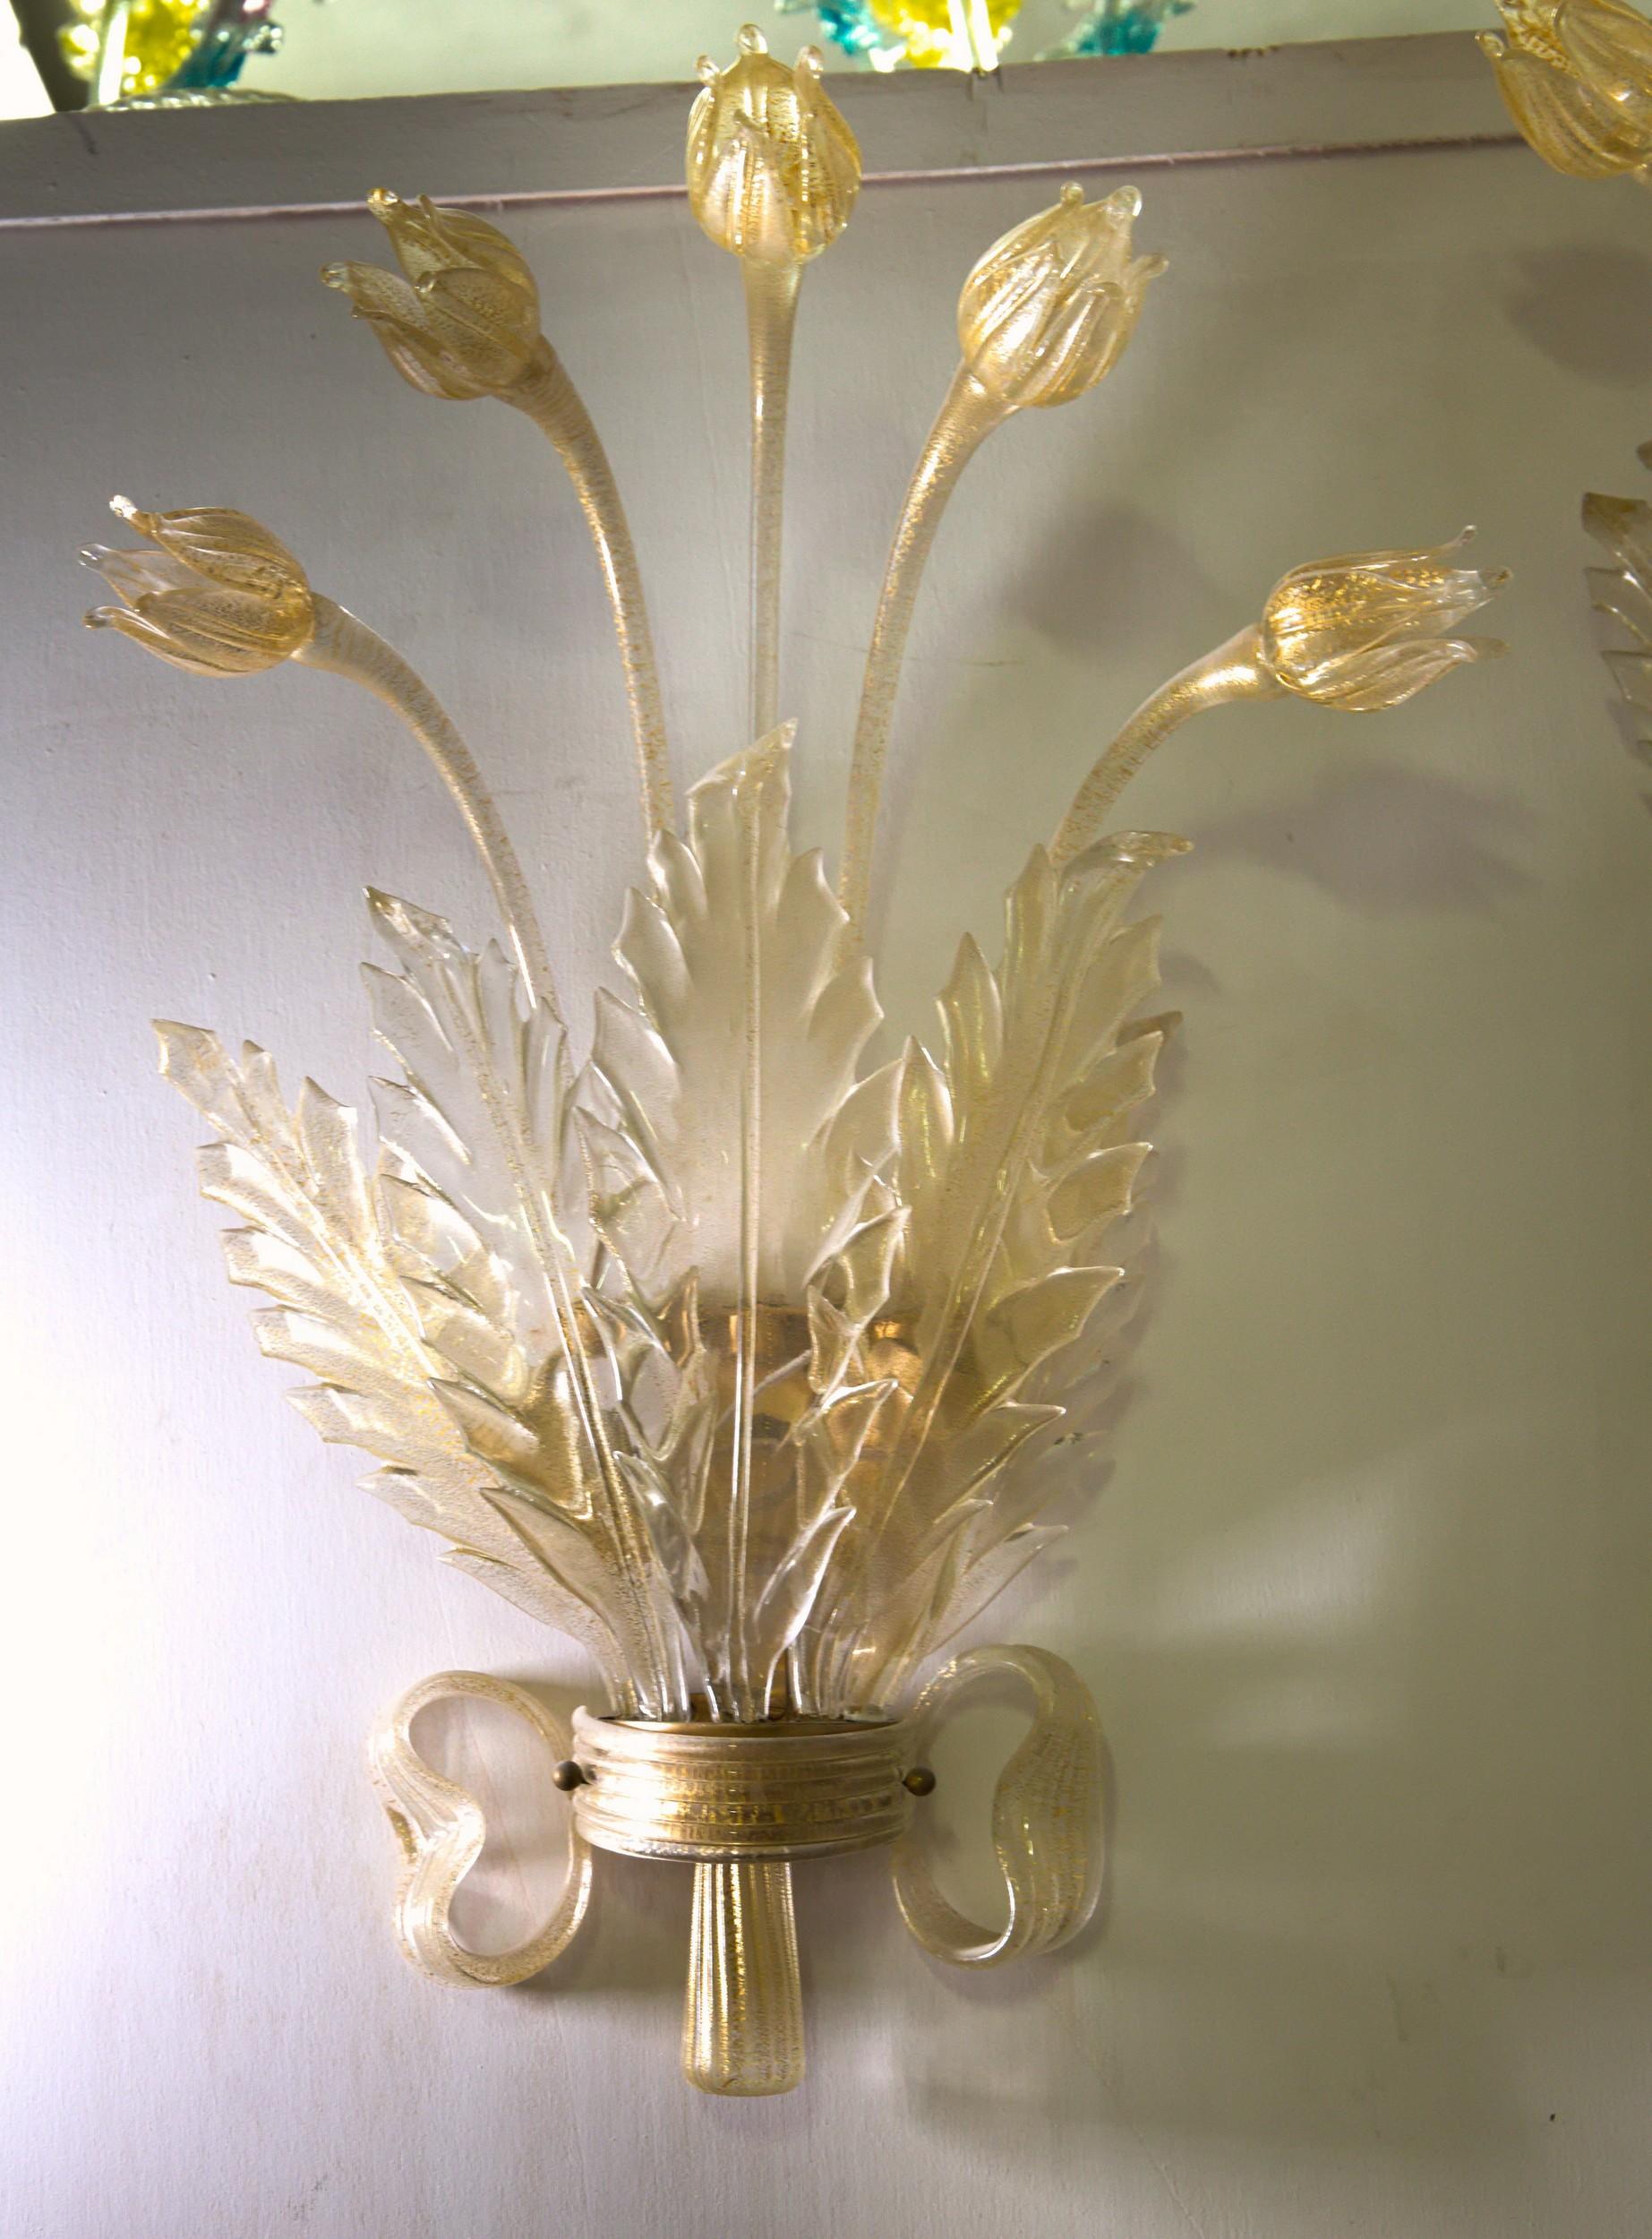 Seguso Pair of Sconces, Murano Glass with Gold Leaf, Tulips, Leaves and Bow Deco For Sale 8